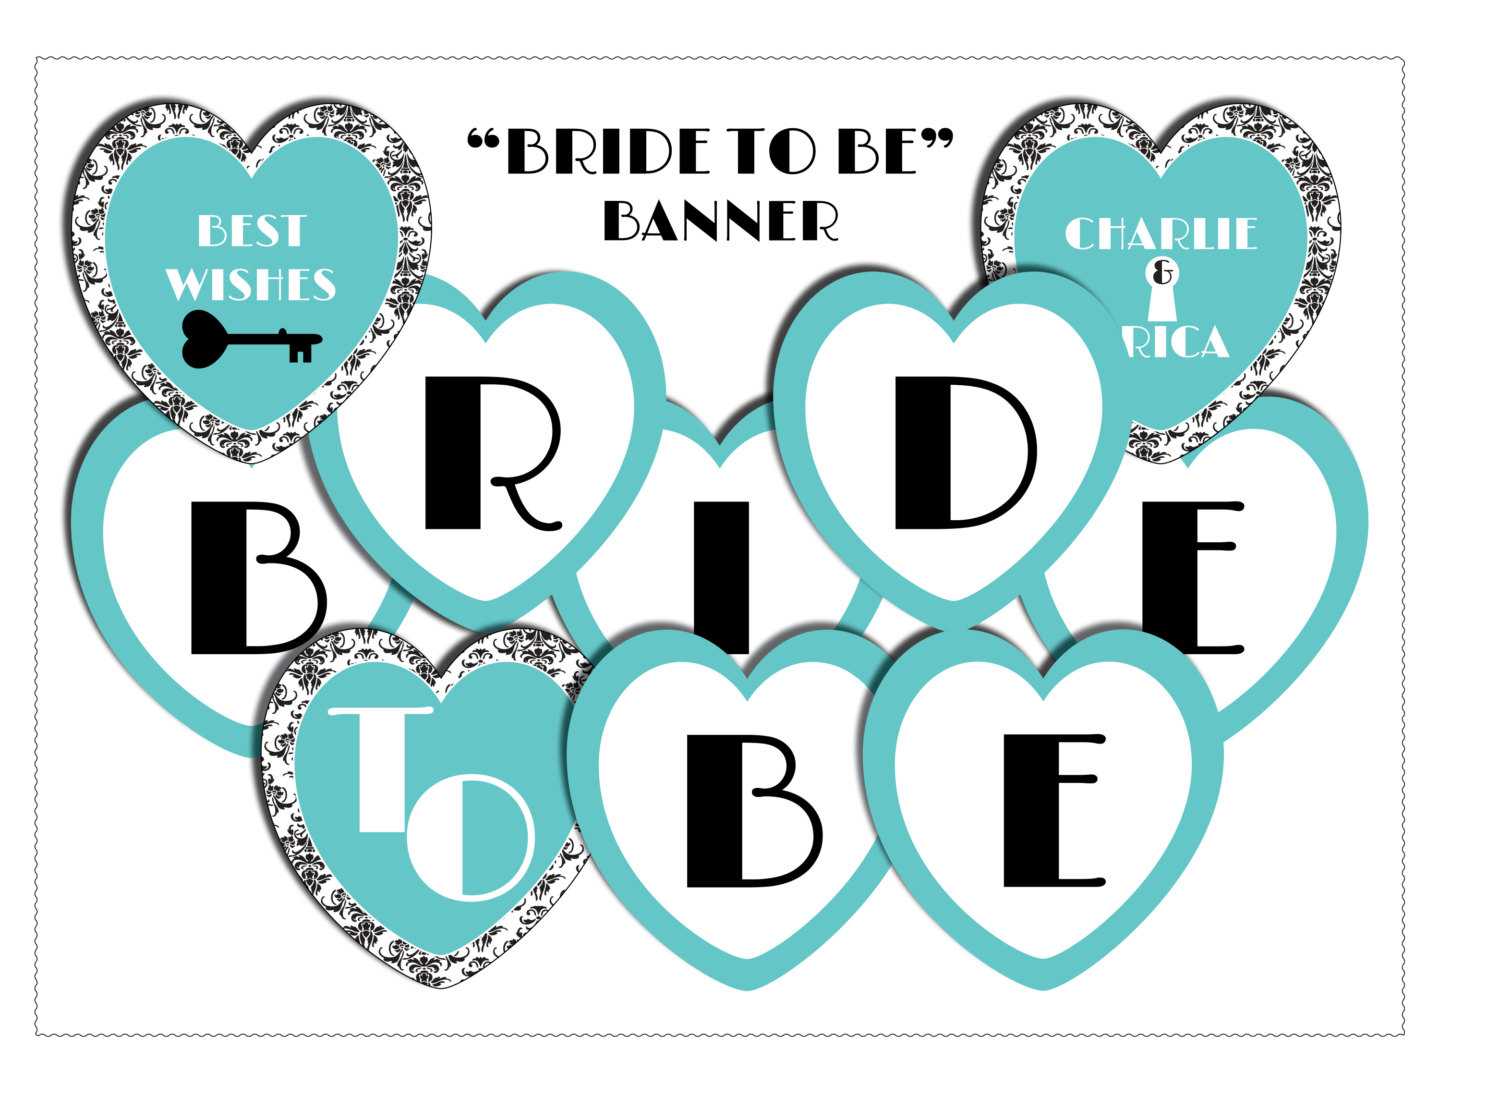 11 Best Photos Of Bride To Be Banner Template - Diy Bridal With Bride To Be Banner Template